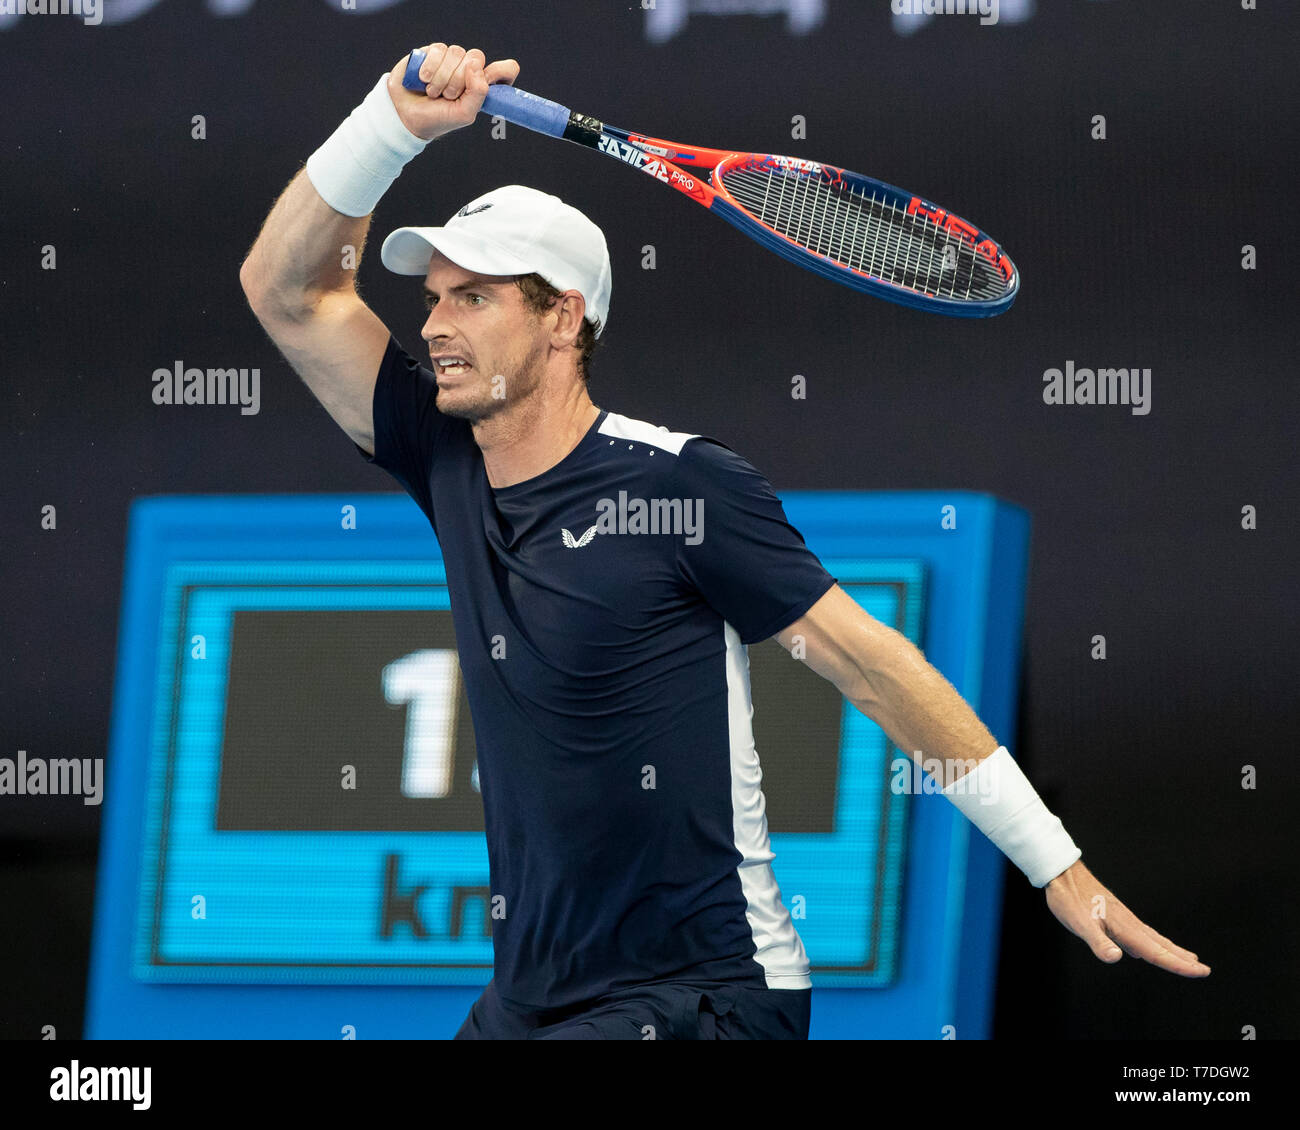 British tennis player Andy Murray playing during Australian Open 2019 tournament, Melbourne Park, Melbourne, Victoria, Australia Stock Photo - Alamy